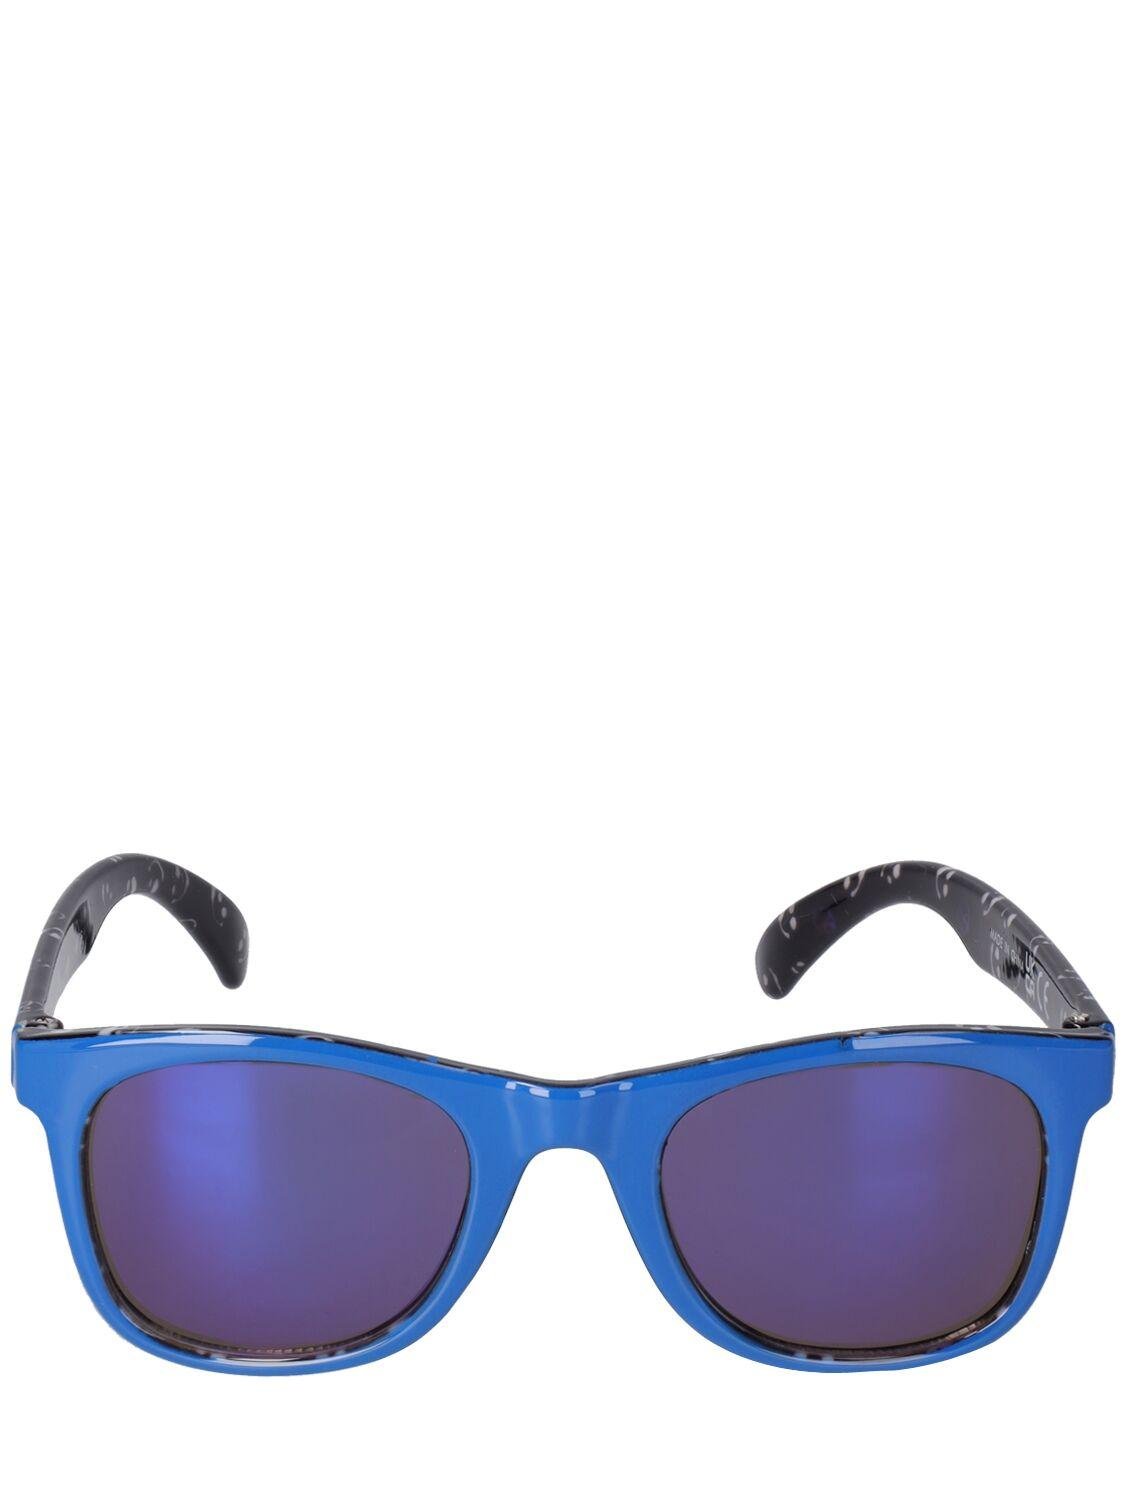 Printed Polycarbonate Sunglasses by MOLO